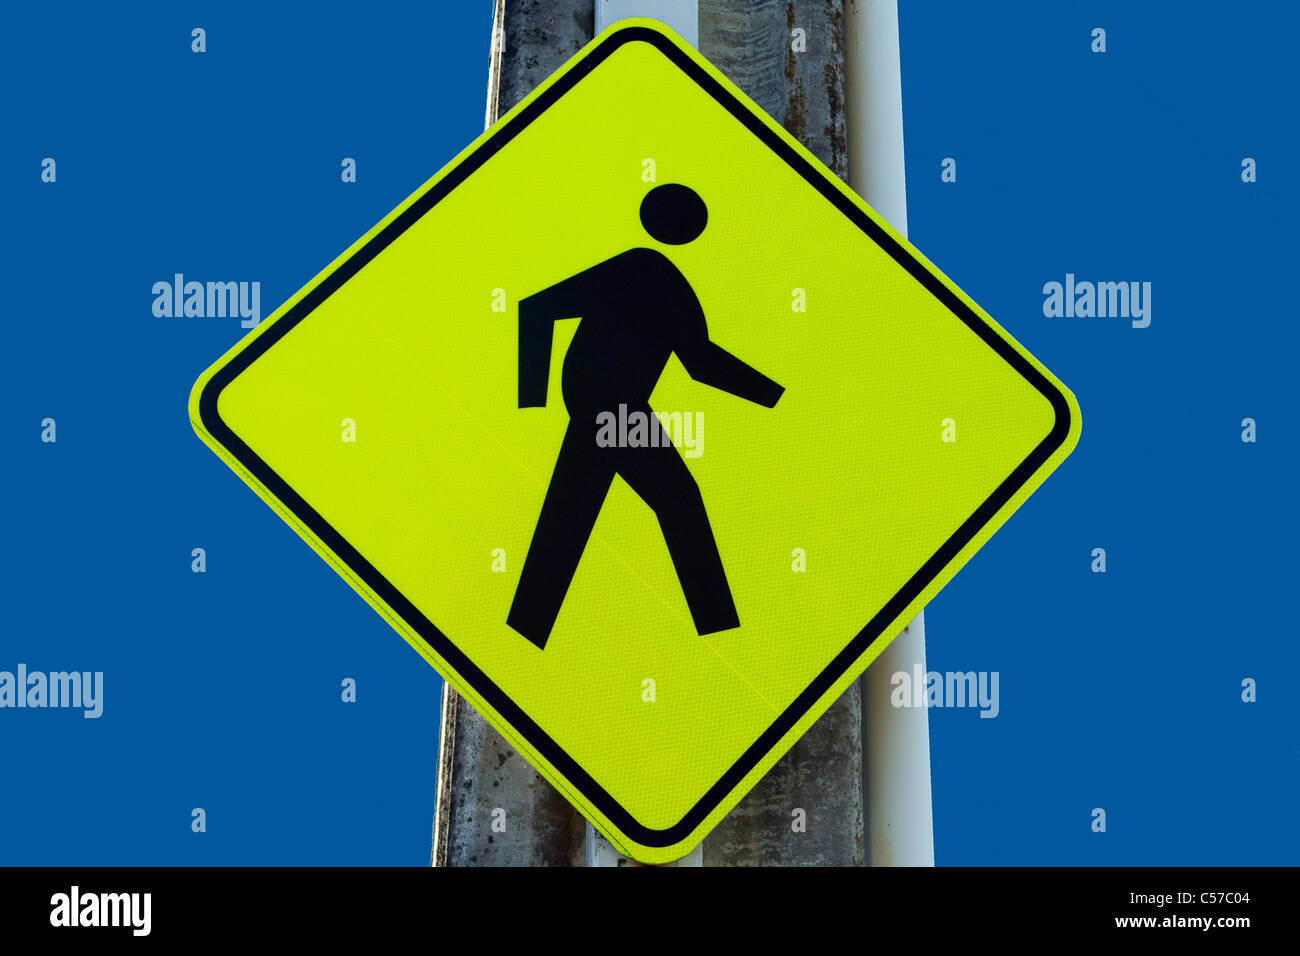 Traffic Sign, Pedestrian Crossing, Auckland, New Zealand, Monday, July 11, 2011. Stock Photo